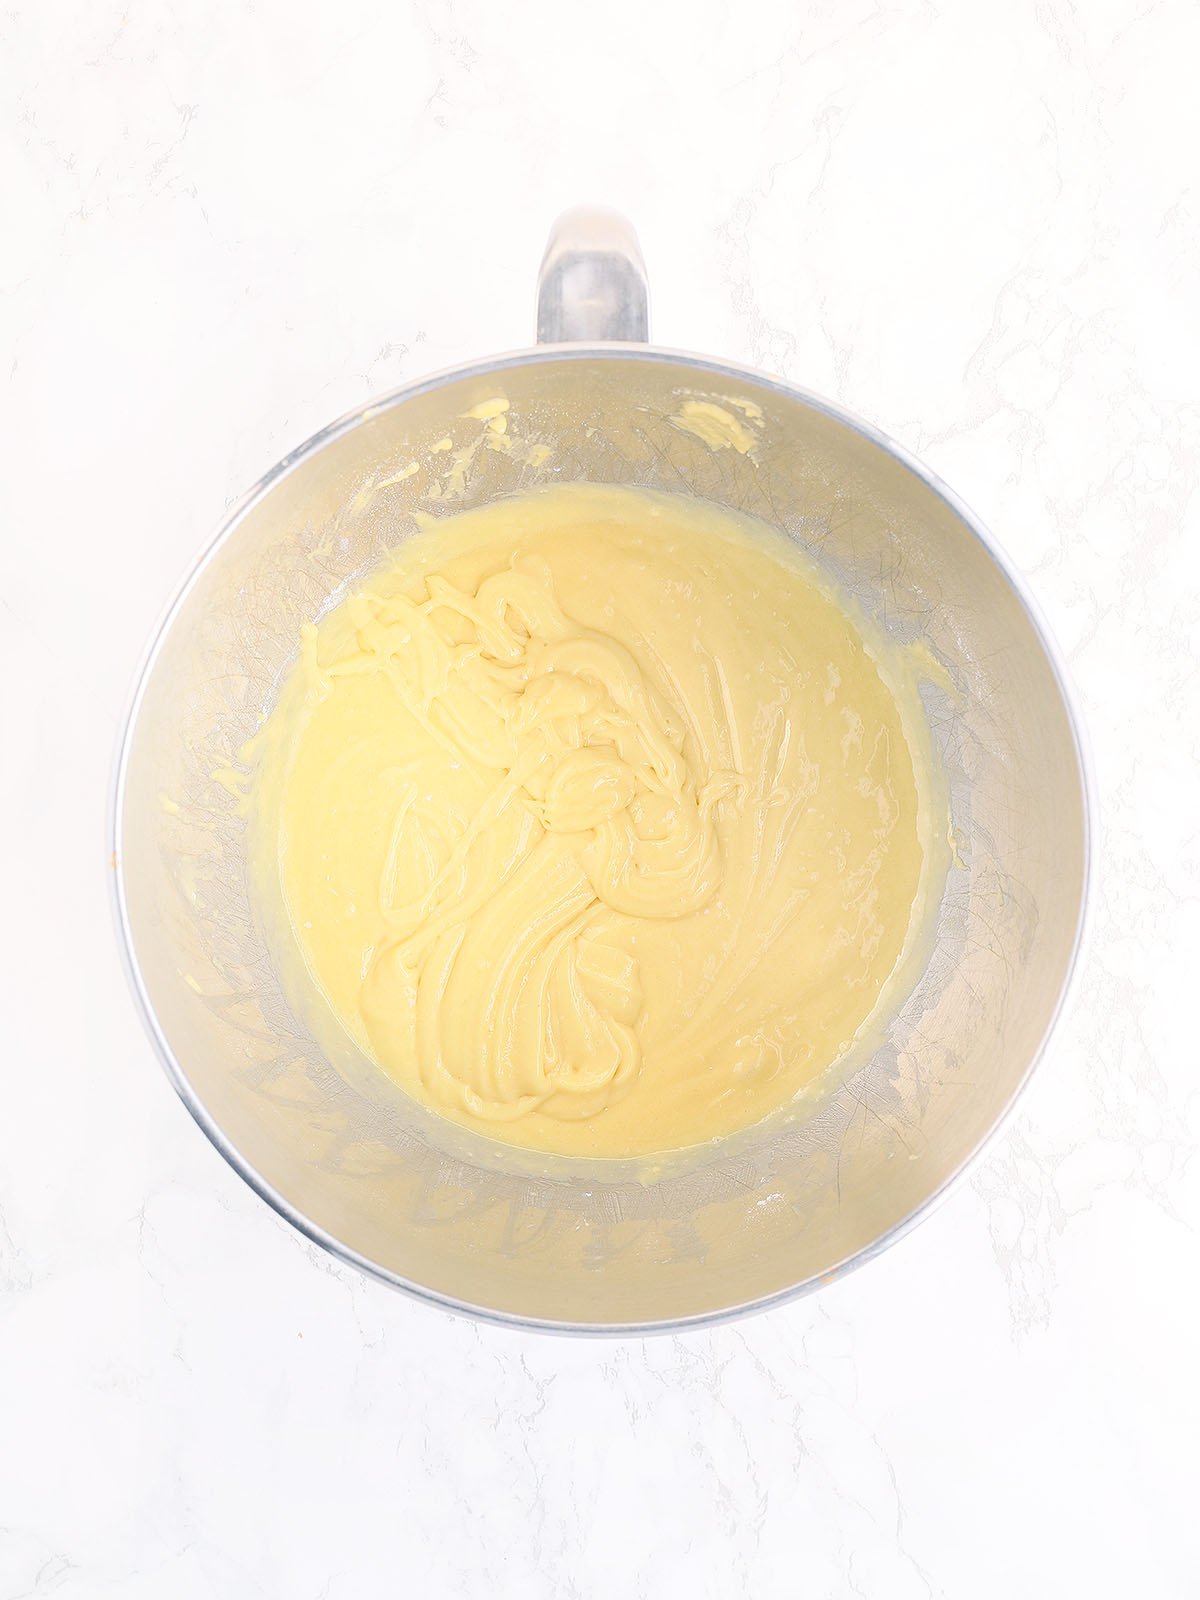 Cake mix, oil and apricot nectar mixed together in a metal bowl